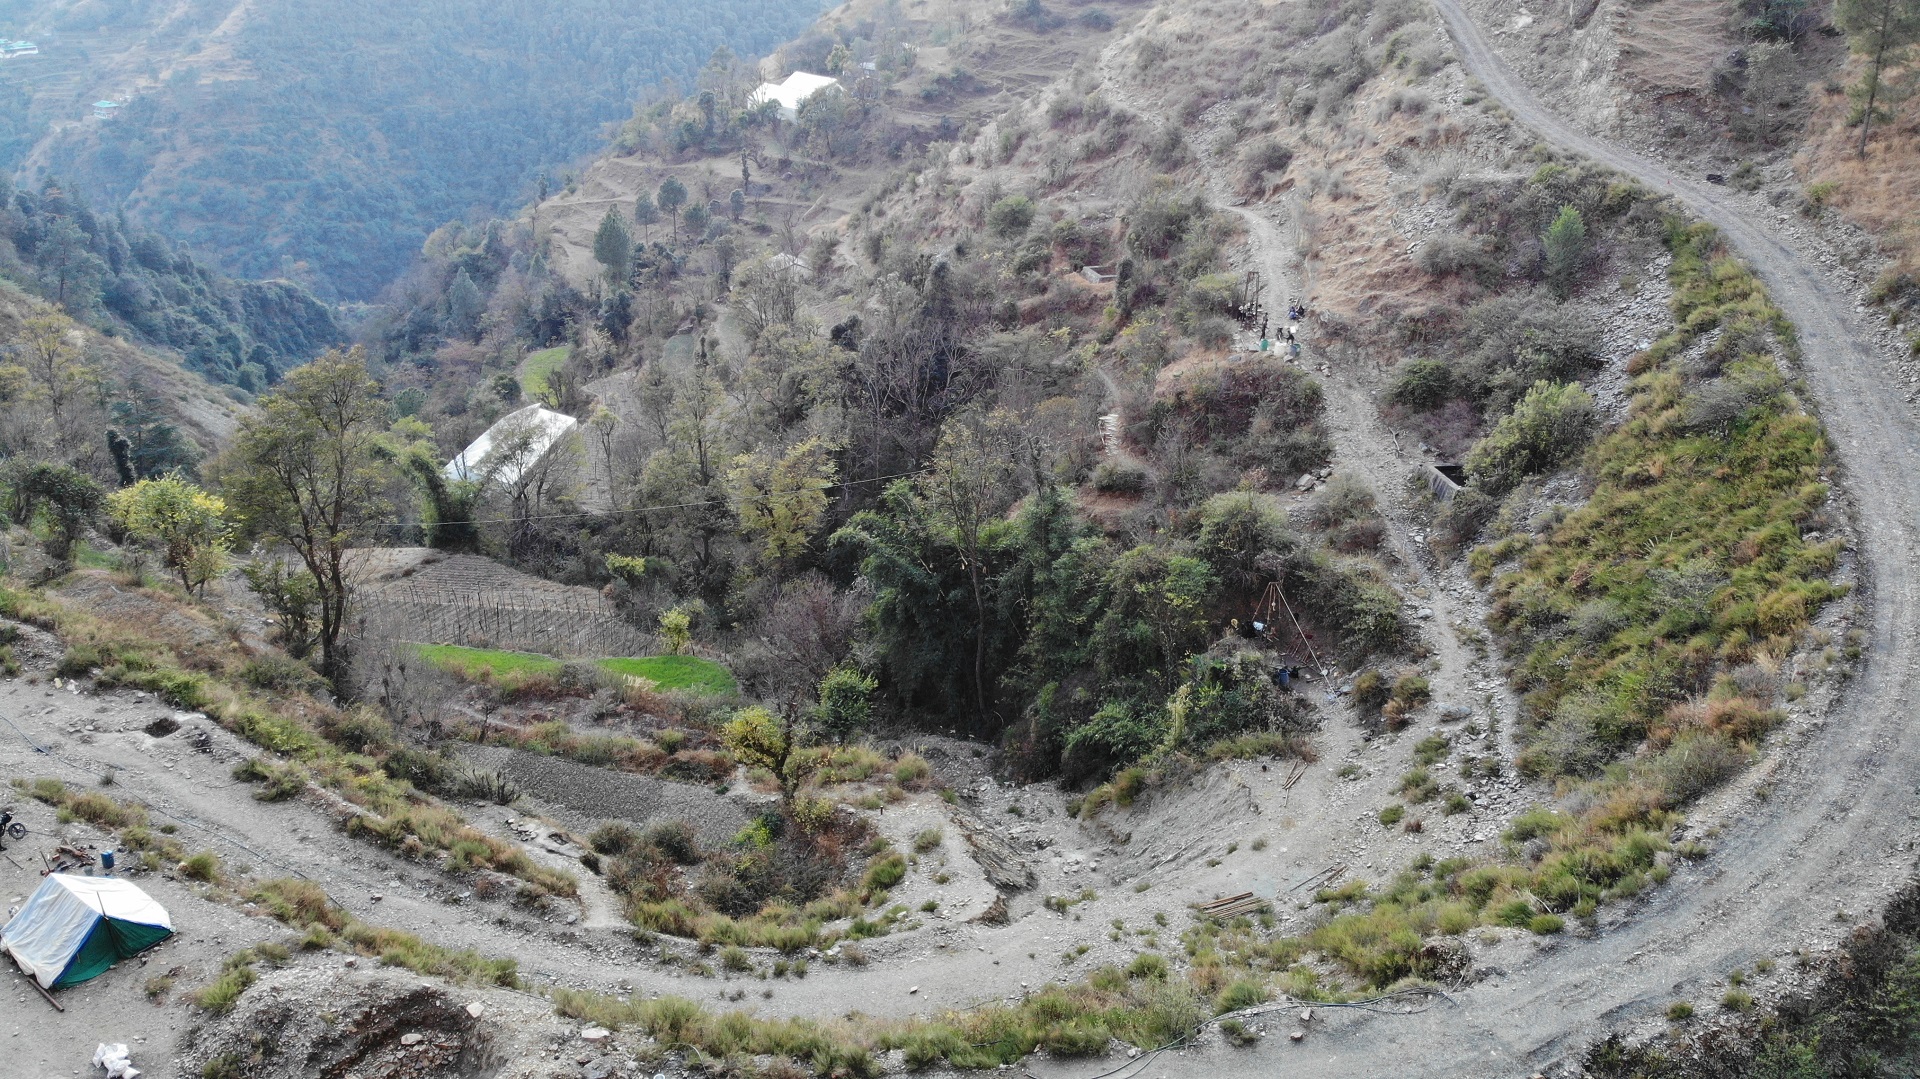 Design and Construction of Shimla Bypass, Package-1 Between Kaithlighat – Sakral